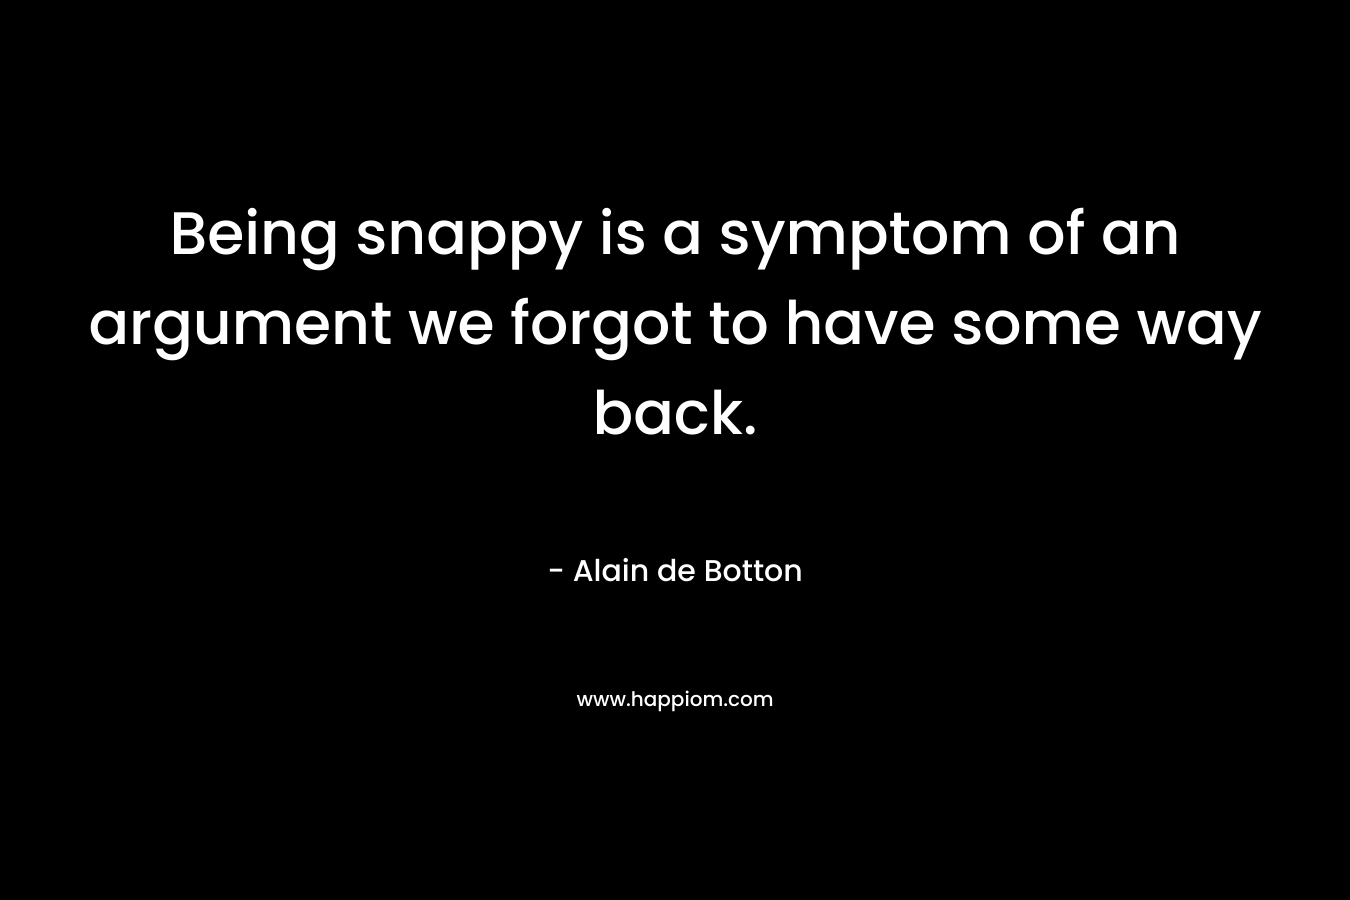 Being snappy is a symptom of an argument we forgot to have some way back.